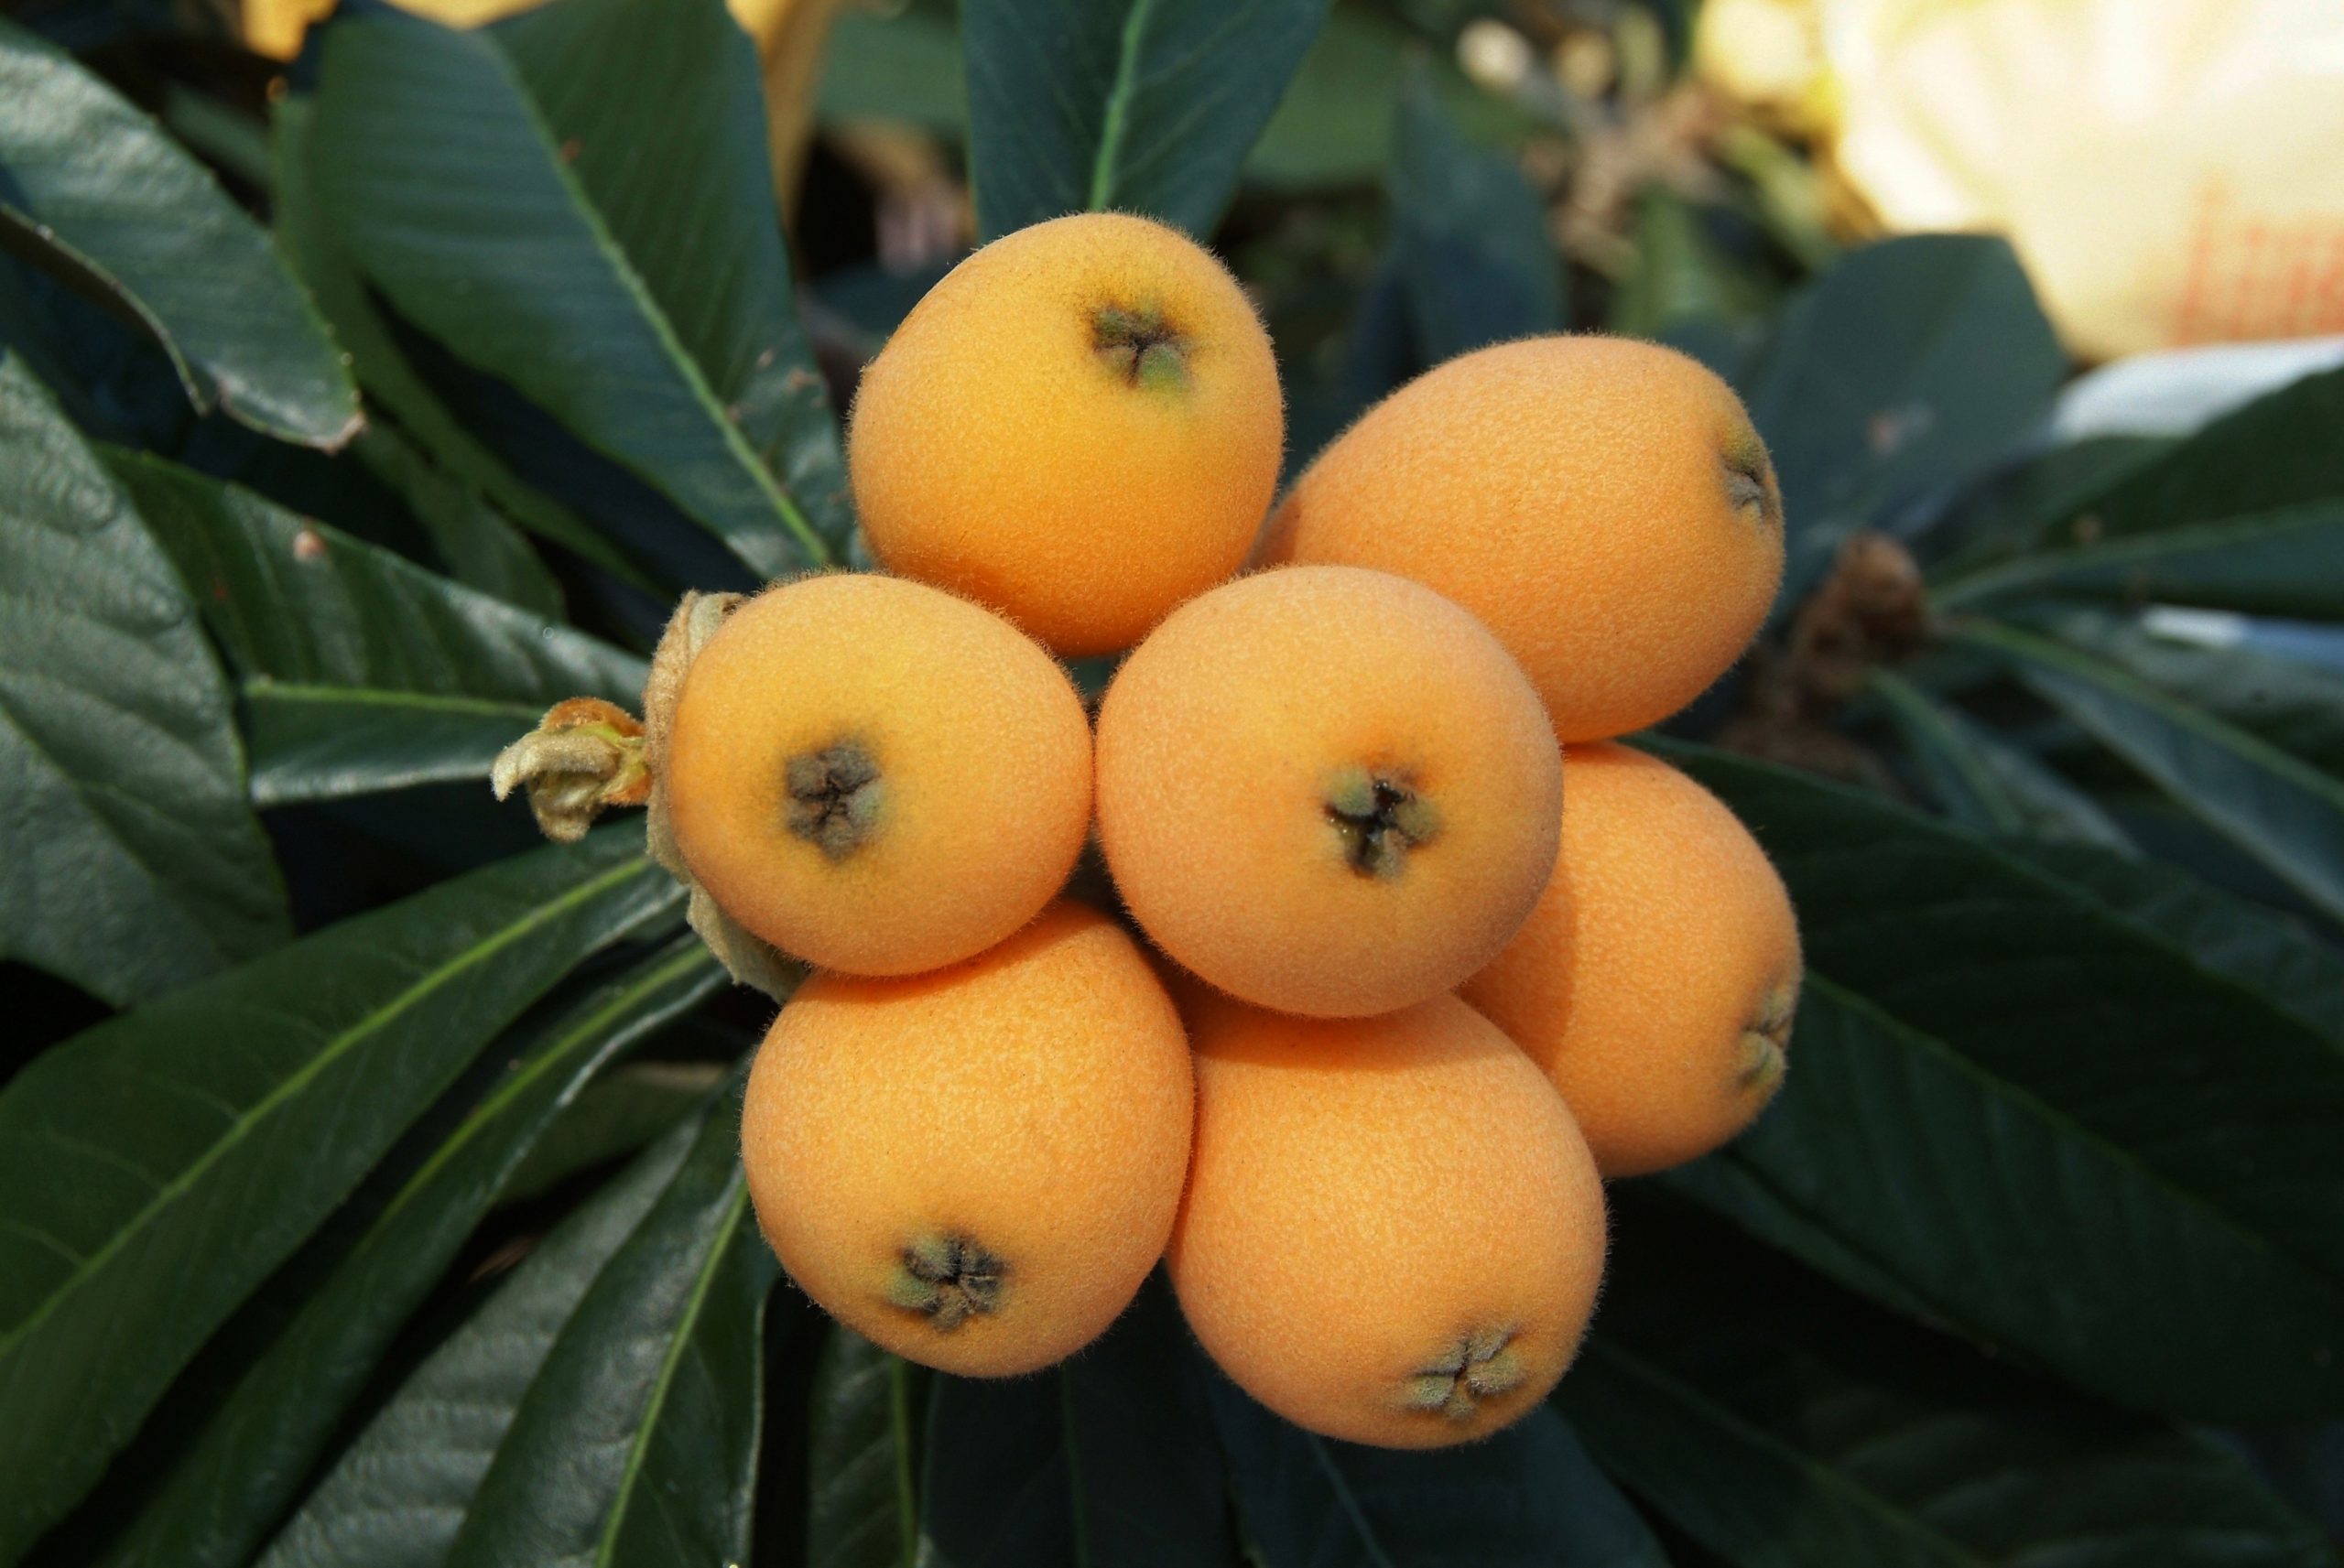 The loquat tree fruit, known as a pome, forms in small oval clusters with yellow, orange, and red-toned skin, which if left to ripen long enough will have a sweet, citrusy flavor. Loquats can be peeled and eaten fresh and are also a tasty addition to fruit salad.